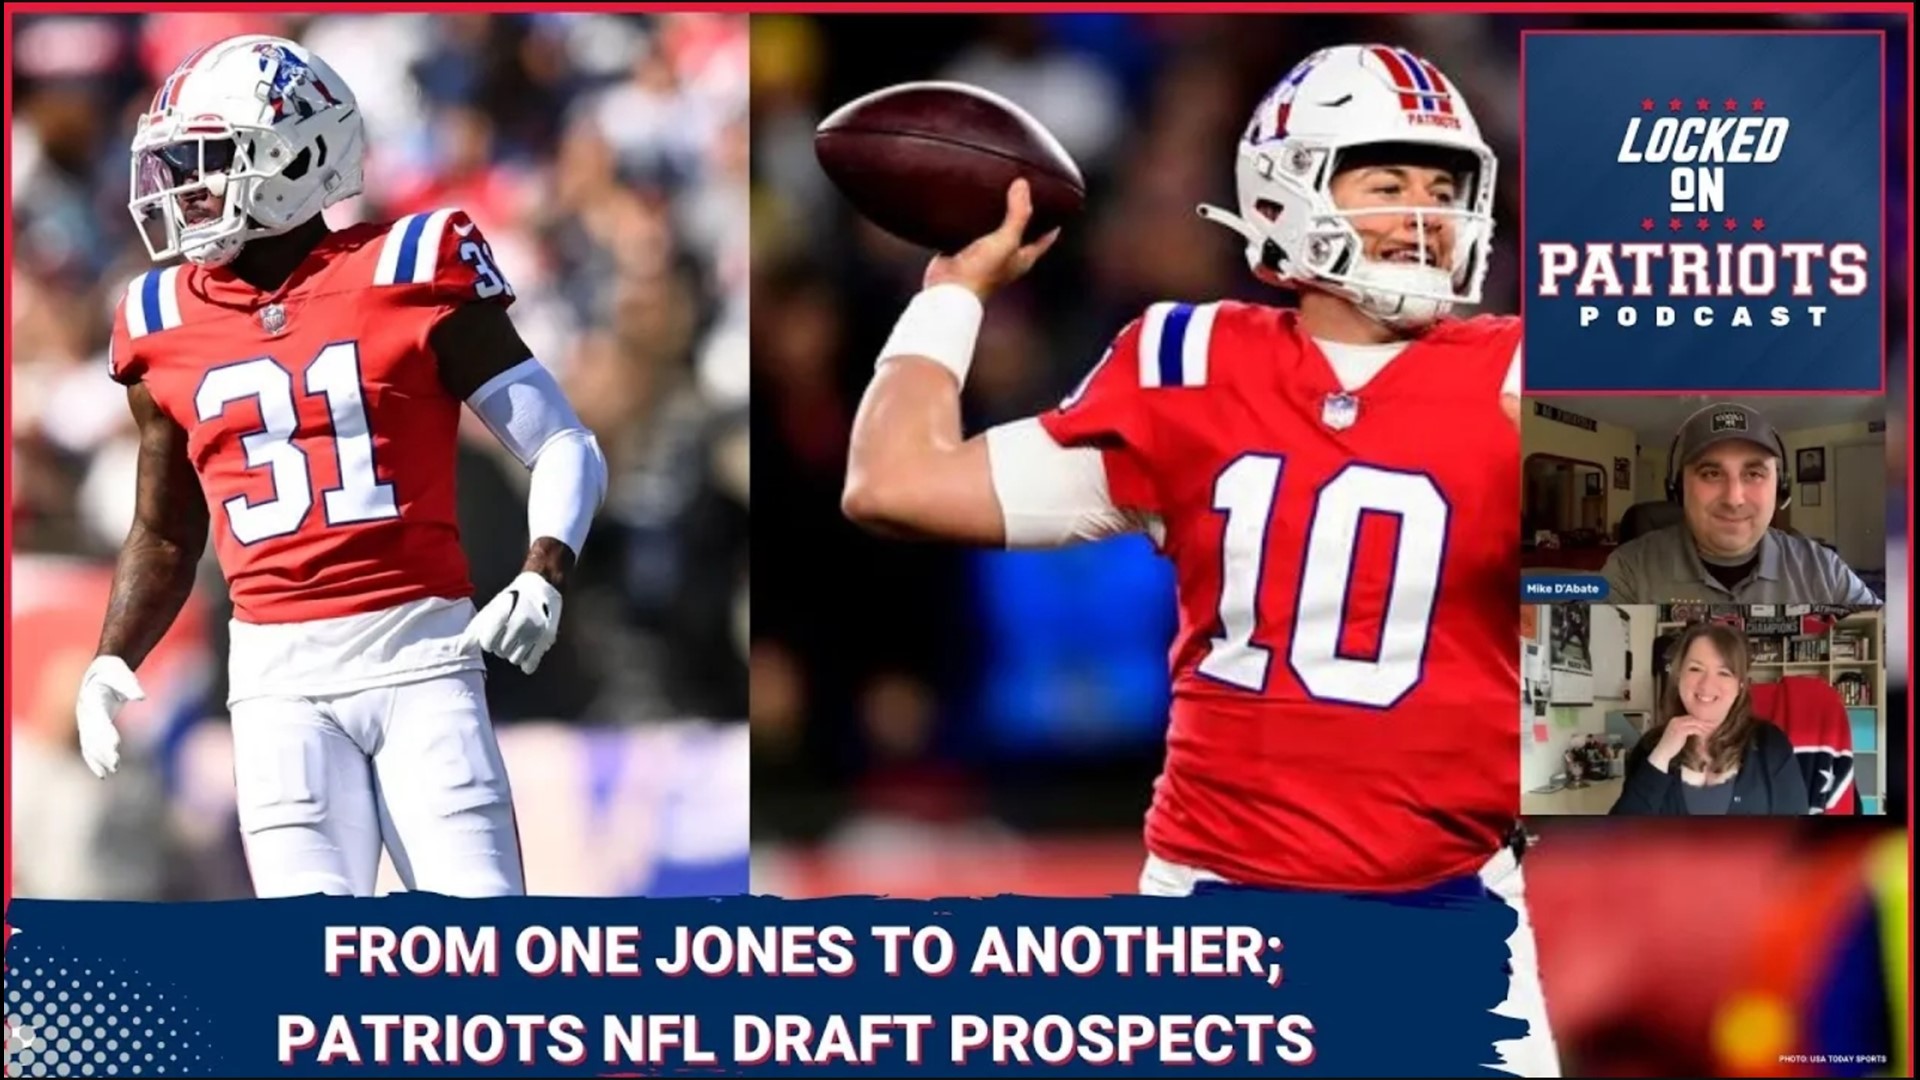 Despite being engulfed in a sea of rumors regarding the future of their roster, the New England Patriots players appear to be putting up a united front.